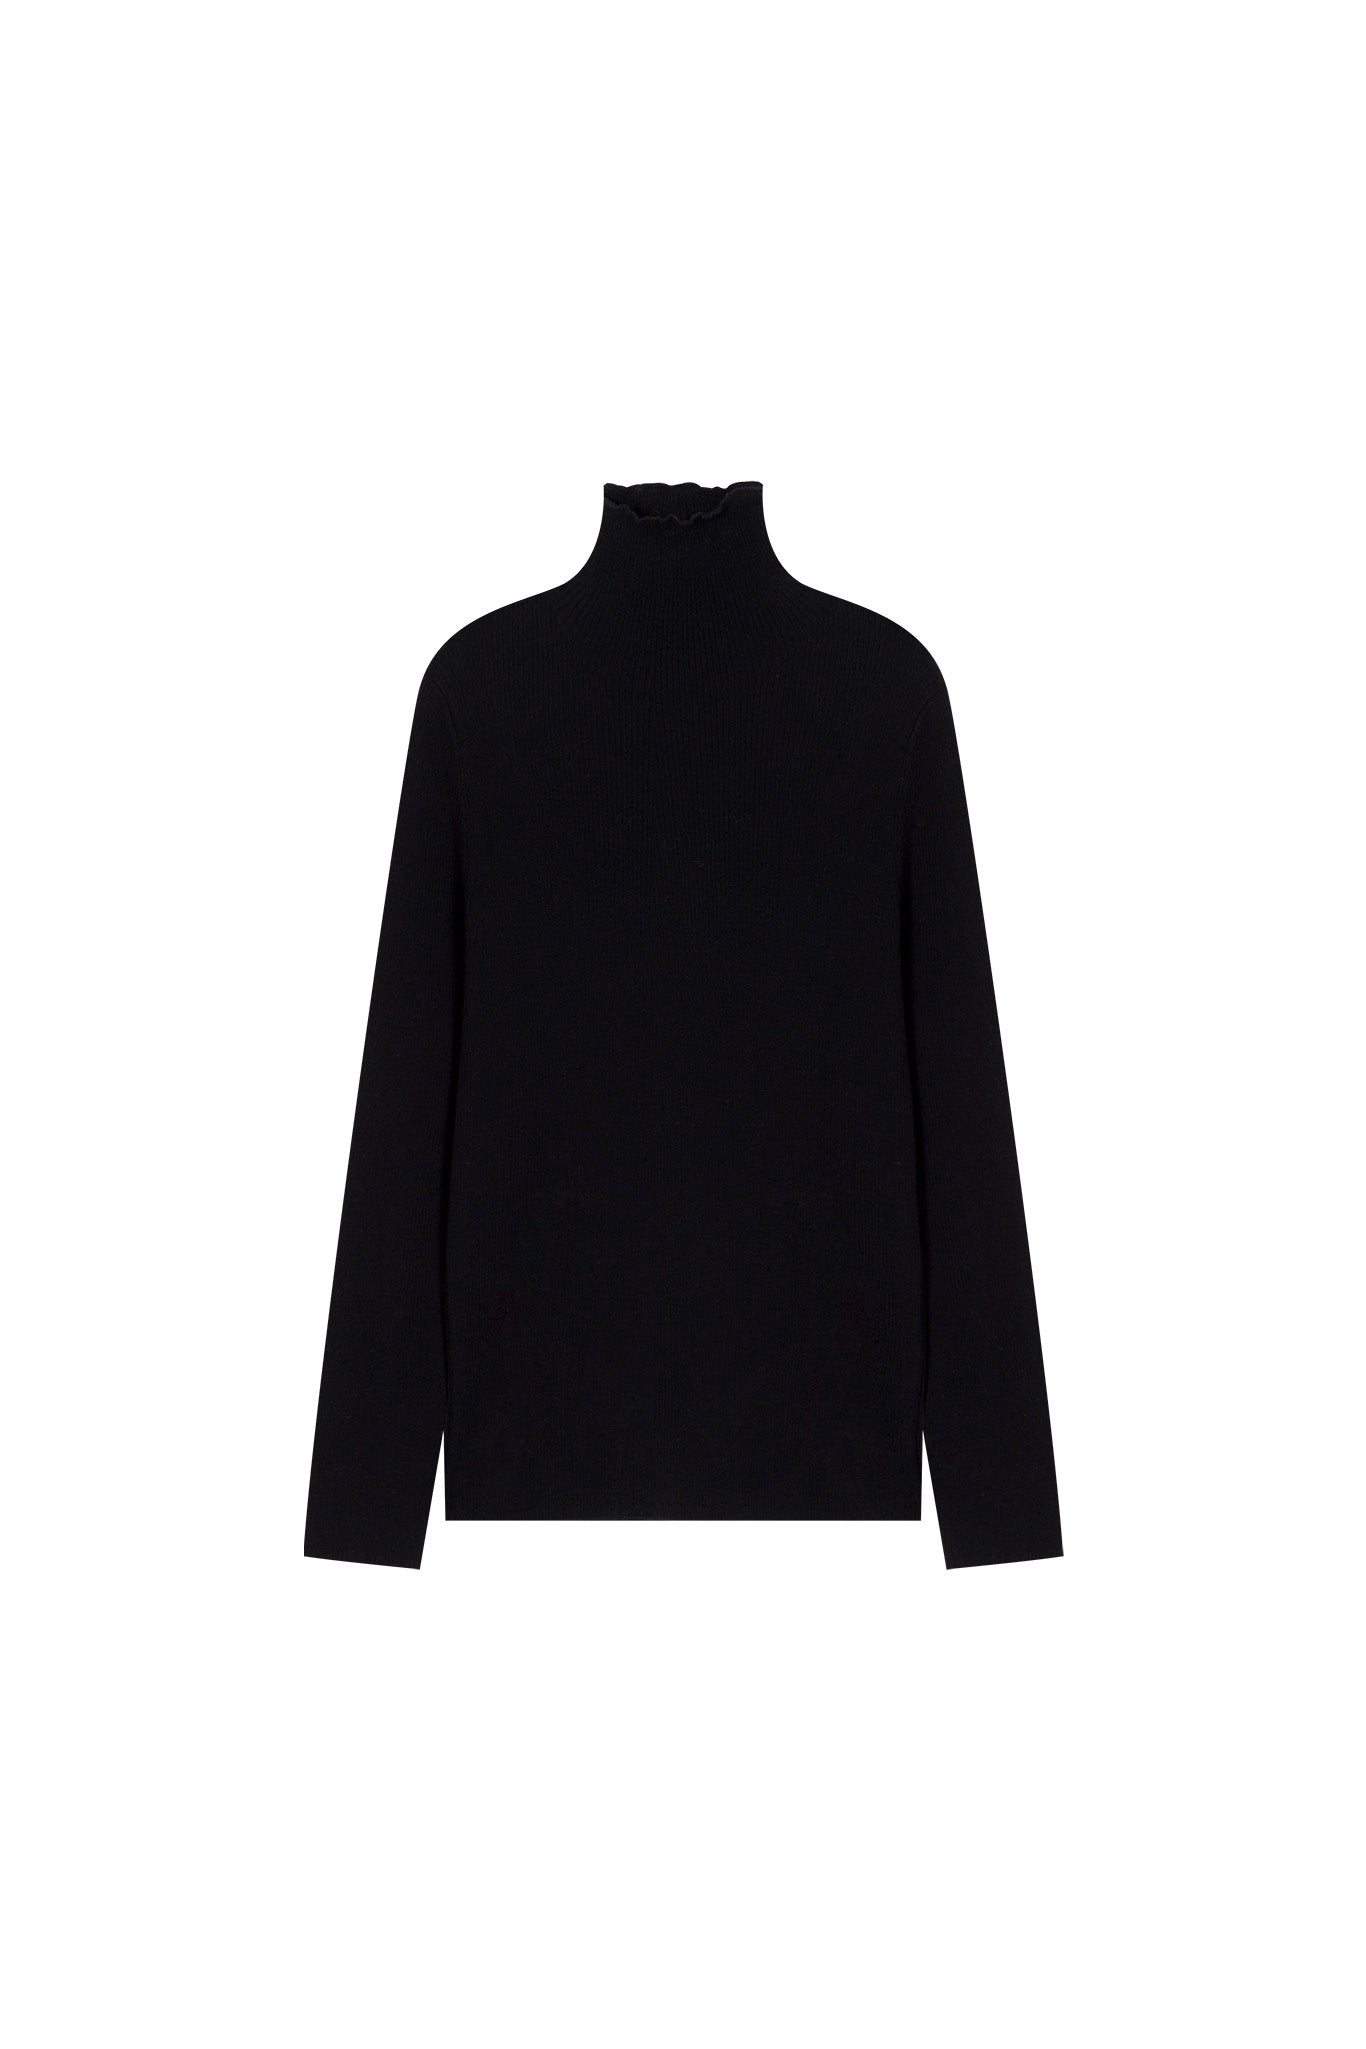 Wool material tight silhouette high neck rib knit top pullover 